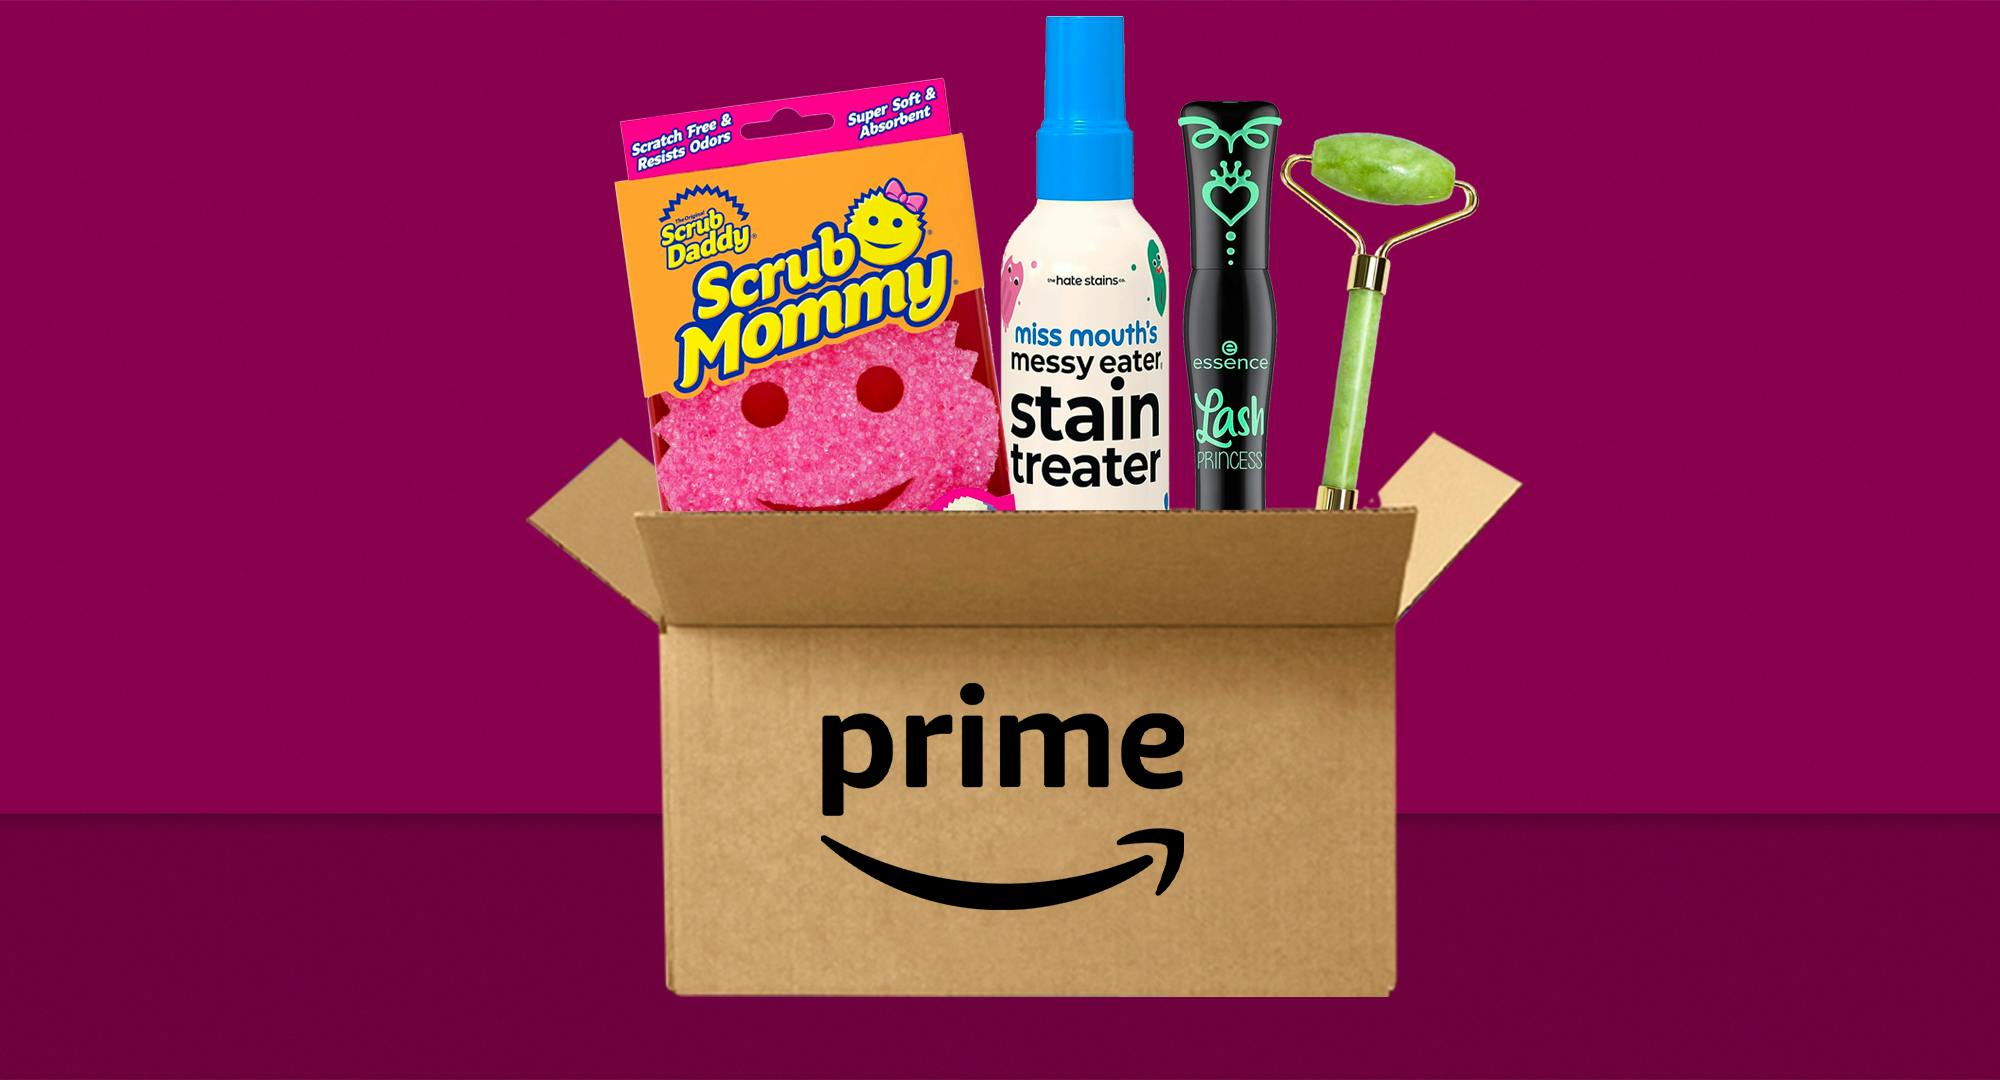 Prime Day Deals Under $5 That Are Still Available - The